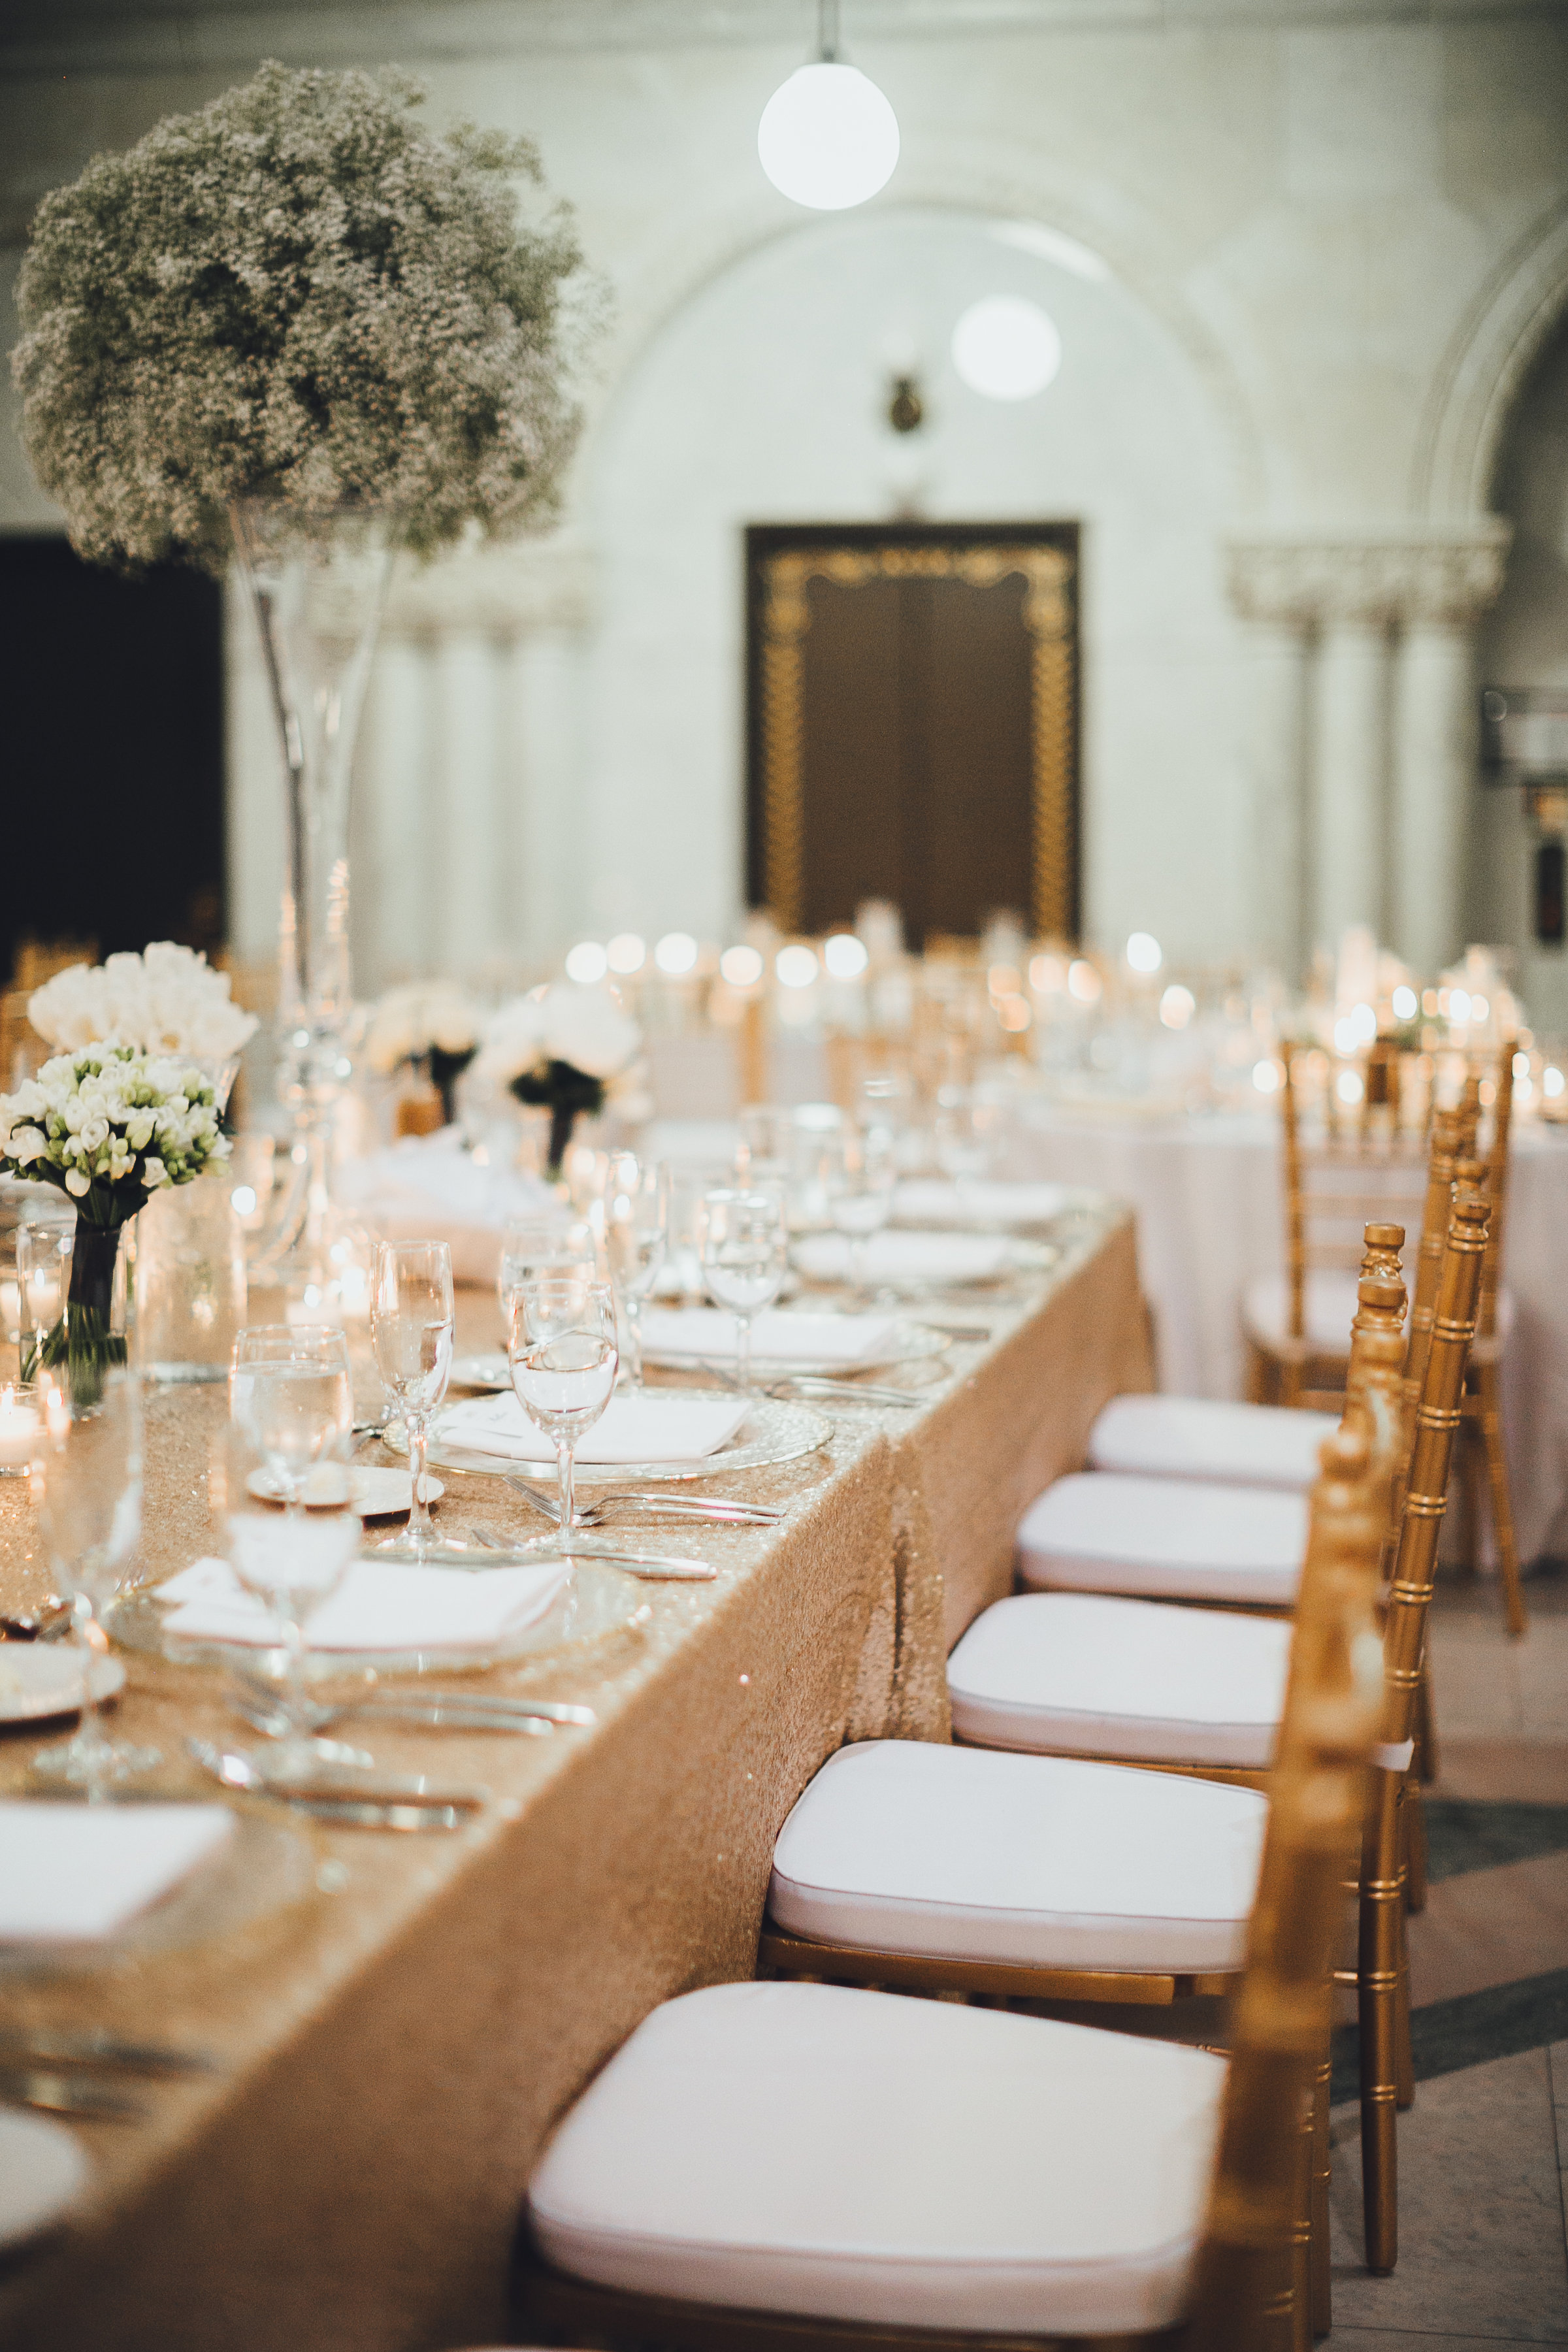 Head table with tall baby's breath arrangements